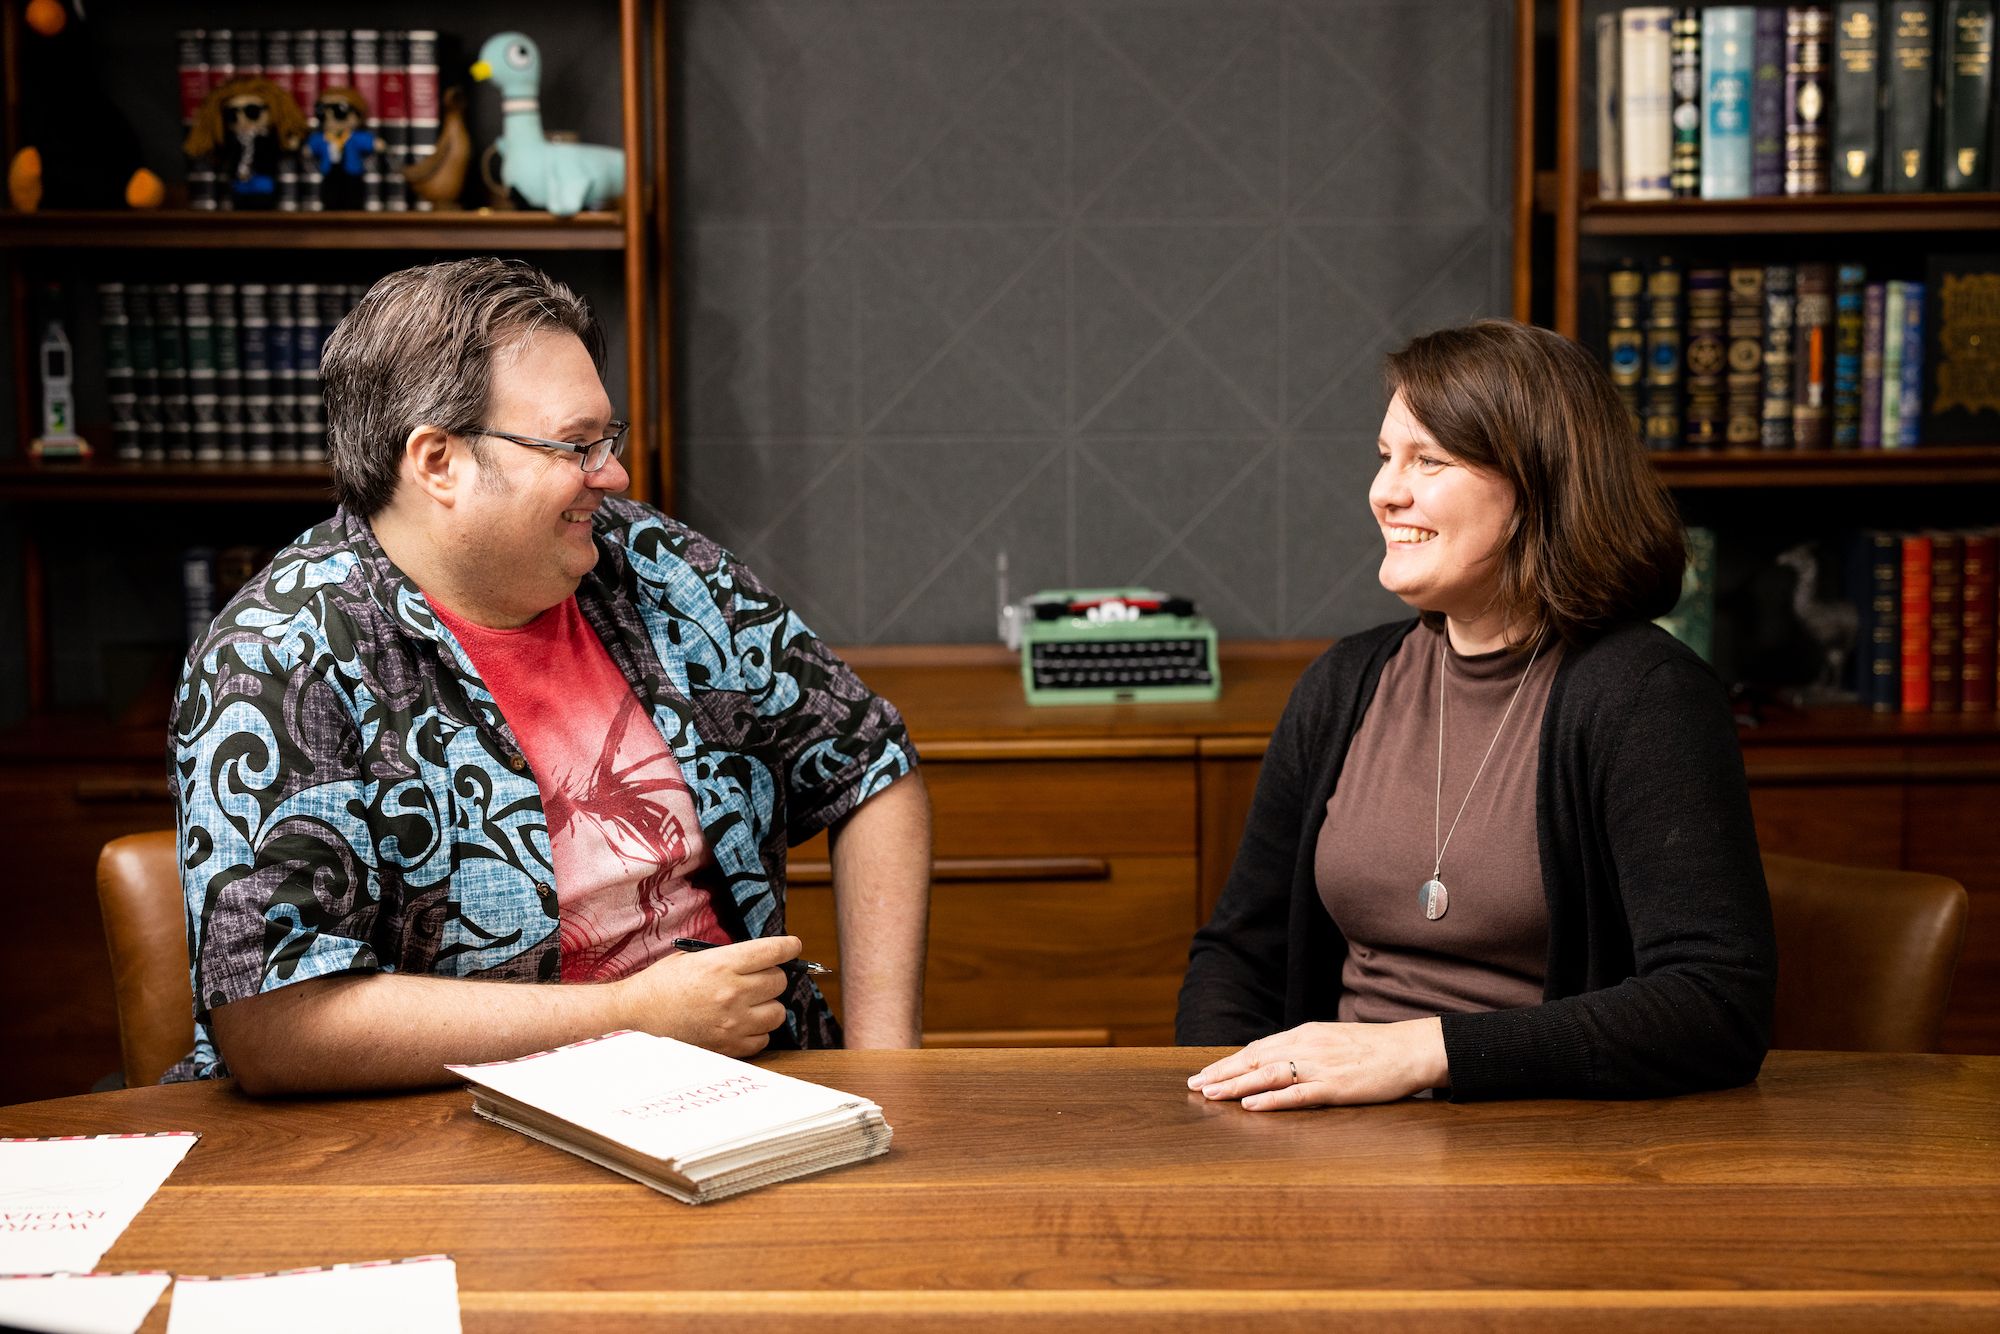 Brandon Sanderson on Building a Fantasy Empire, Wheel of Time Series, and  Criticism